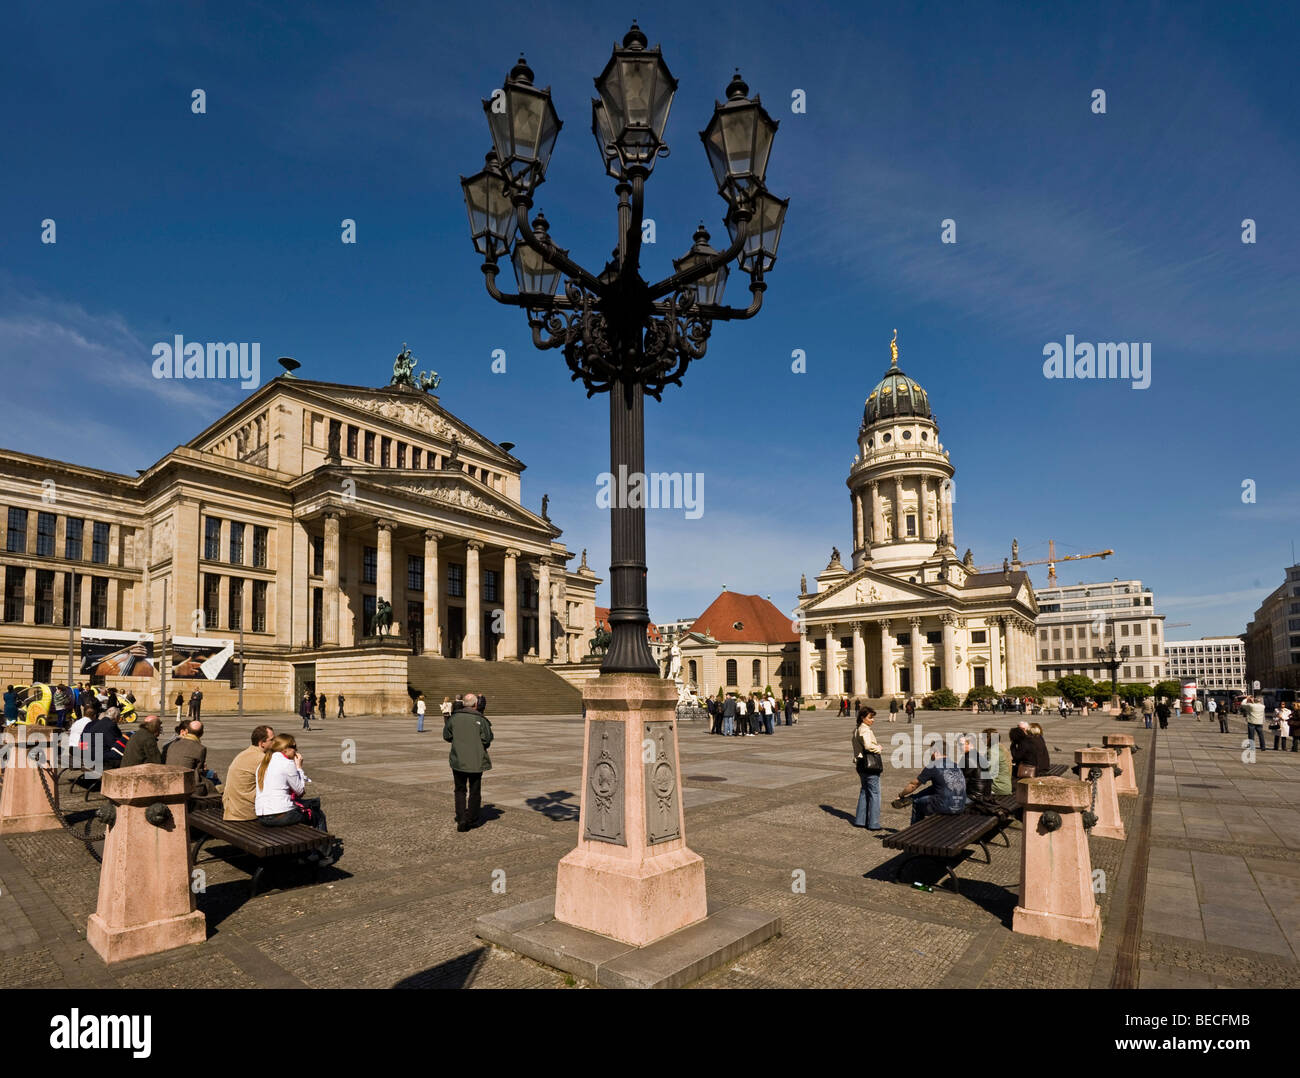 Konzerthaus concert hall and French Cathedral at Gendarmenmarkt square, Berlin-Mitte, Germany, Europe Stock Photo